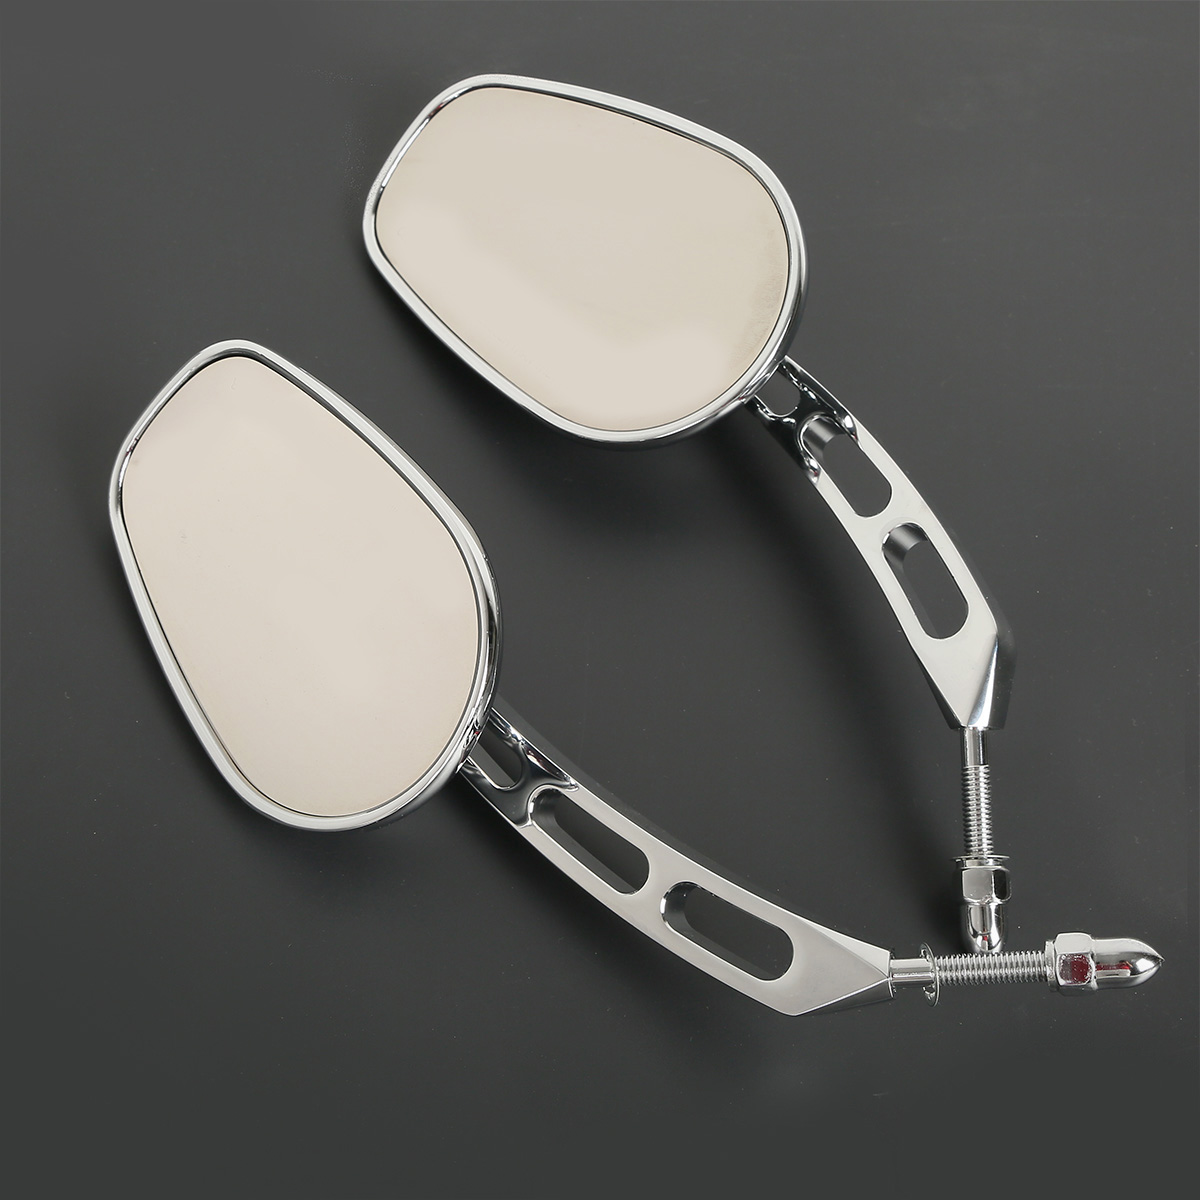 Black/Chrome 8mm Rearview Mirrors For Harley Fat Bob Softail Deluxe 2008-2016